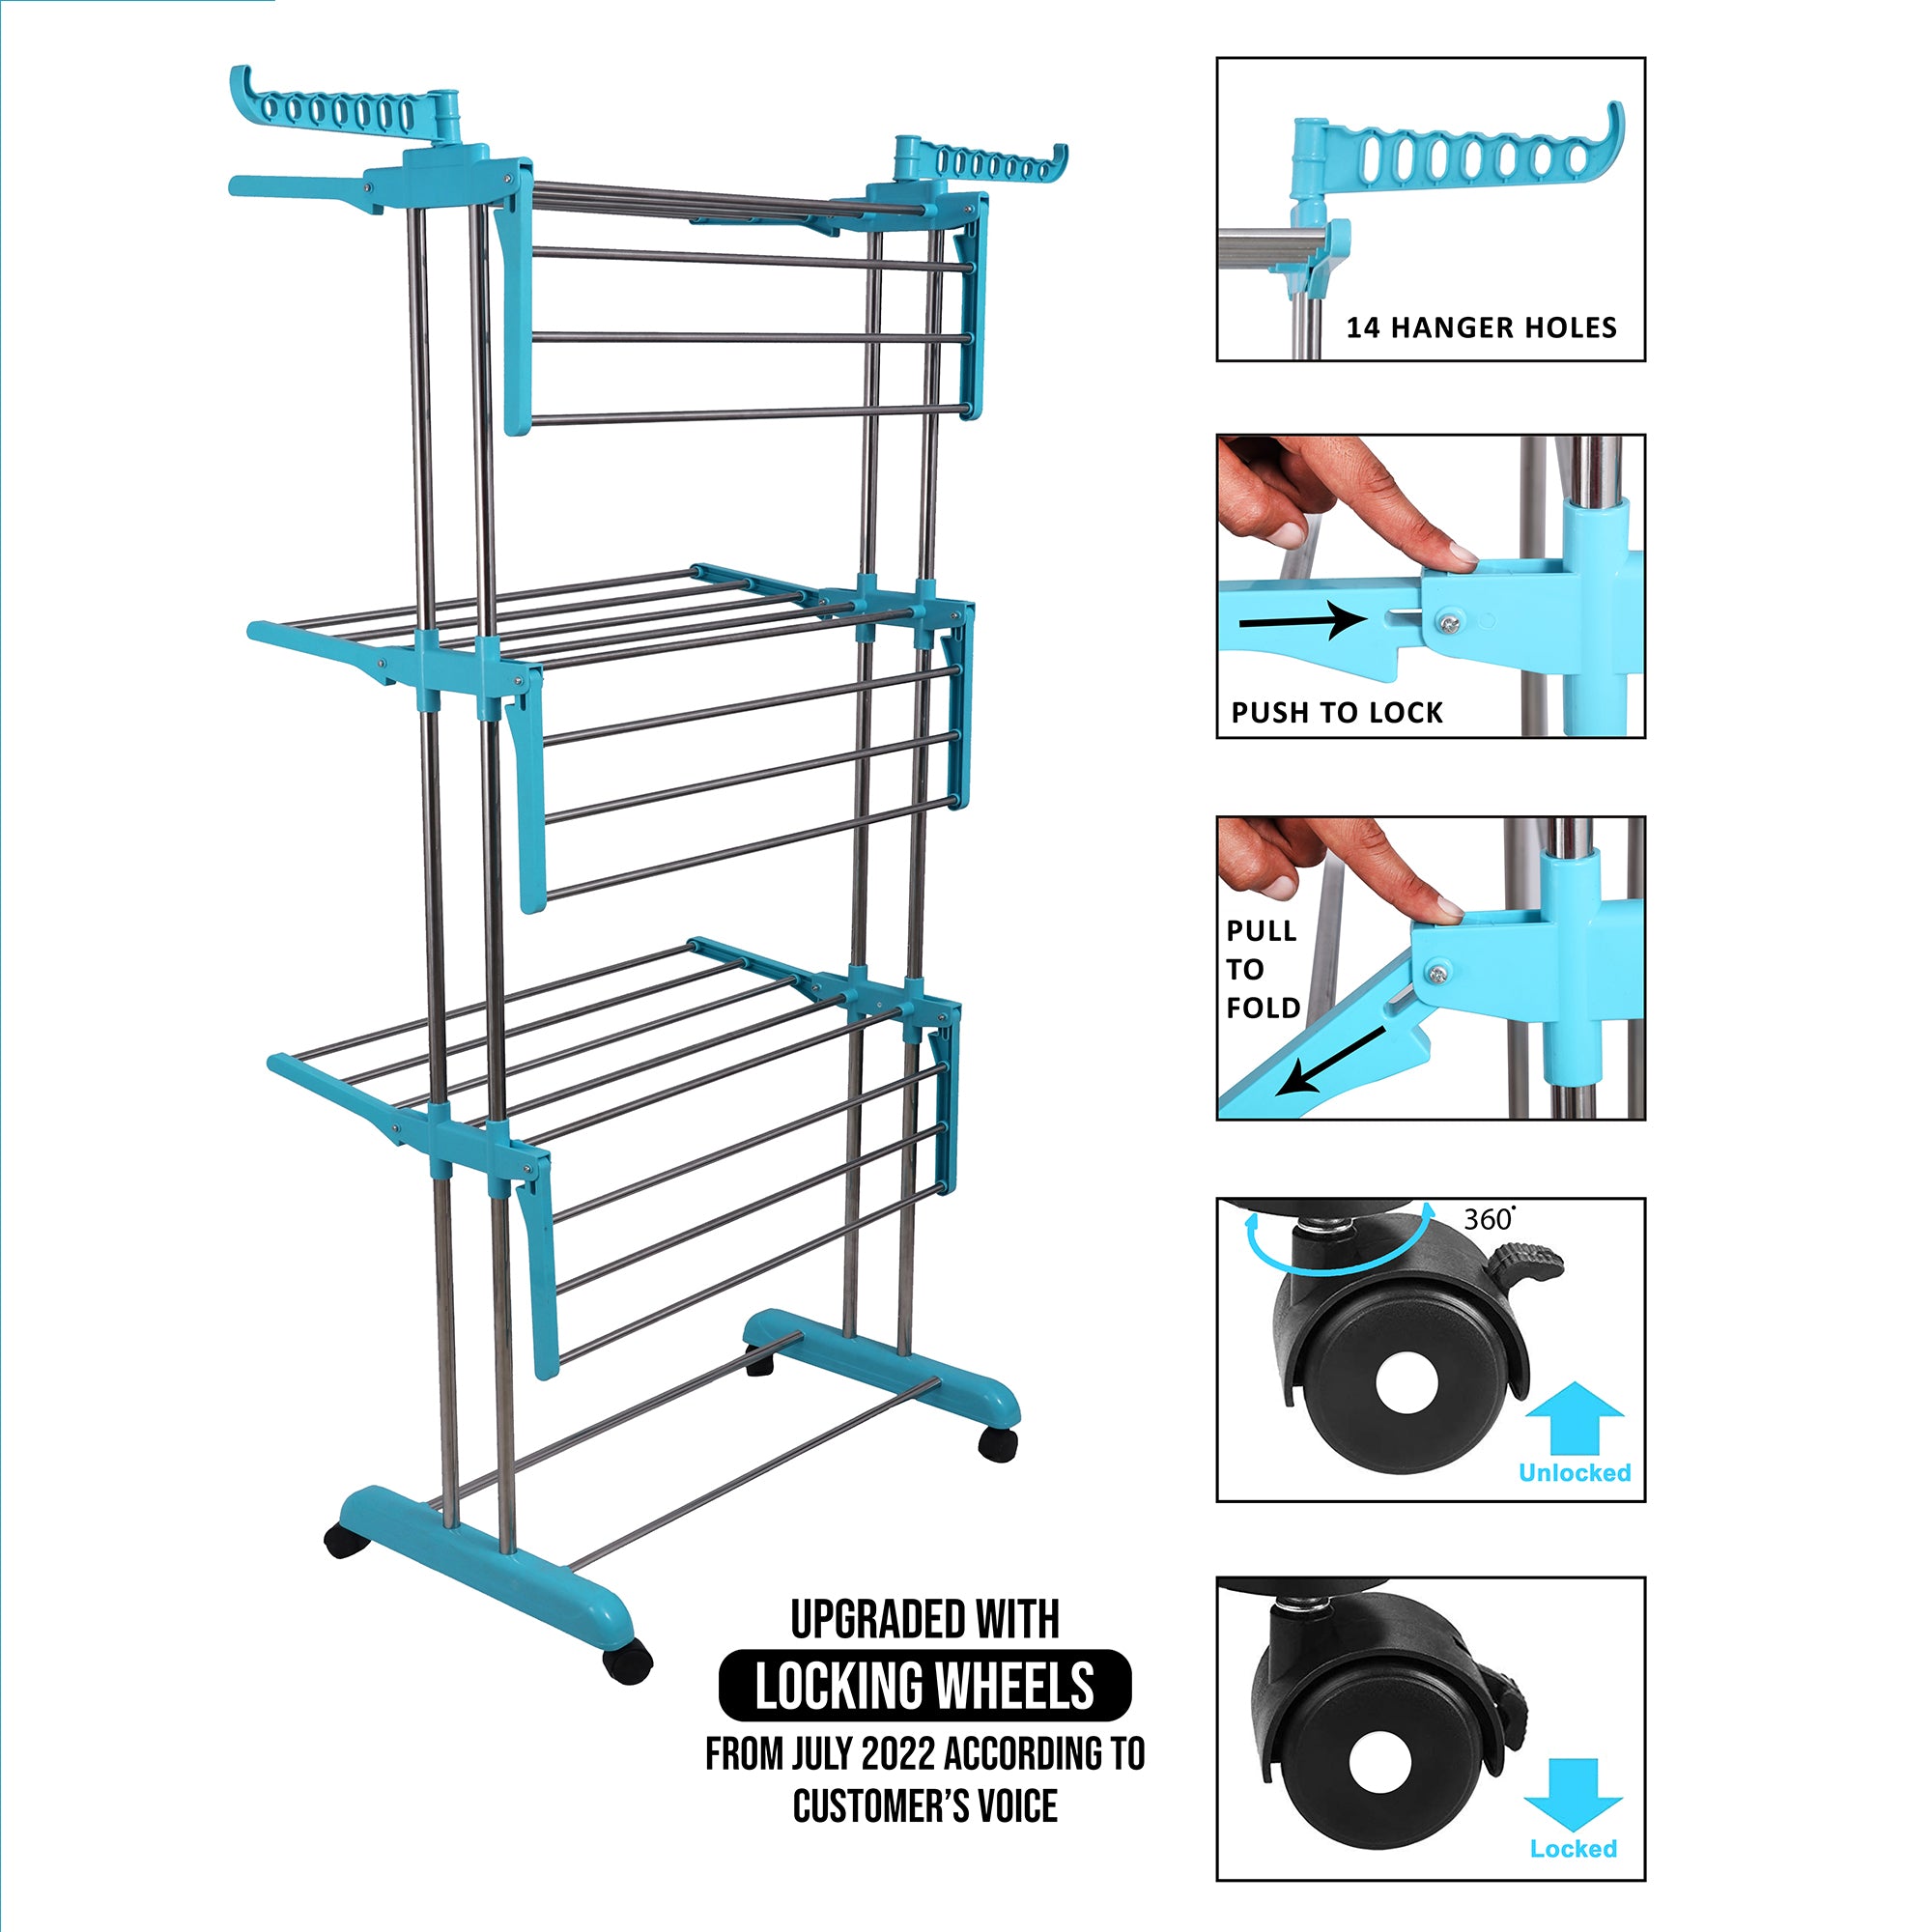 LivingBasics Stainless Steel Double Pole Foldable Clothes Drying Stand/Cloth Dryer Stands/Laundry Dry Rack with Wheels for Indoor/Outdoor/Balcony (Cyan Blue) (ABS Plastic)